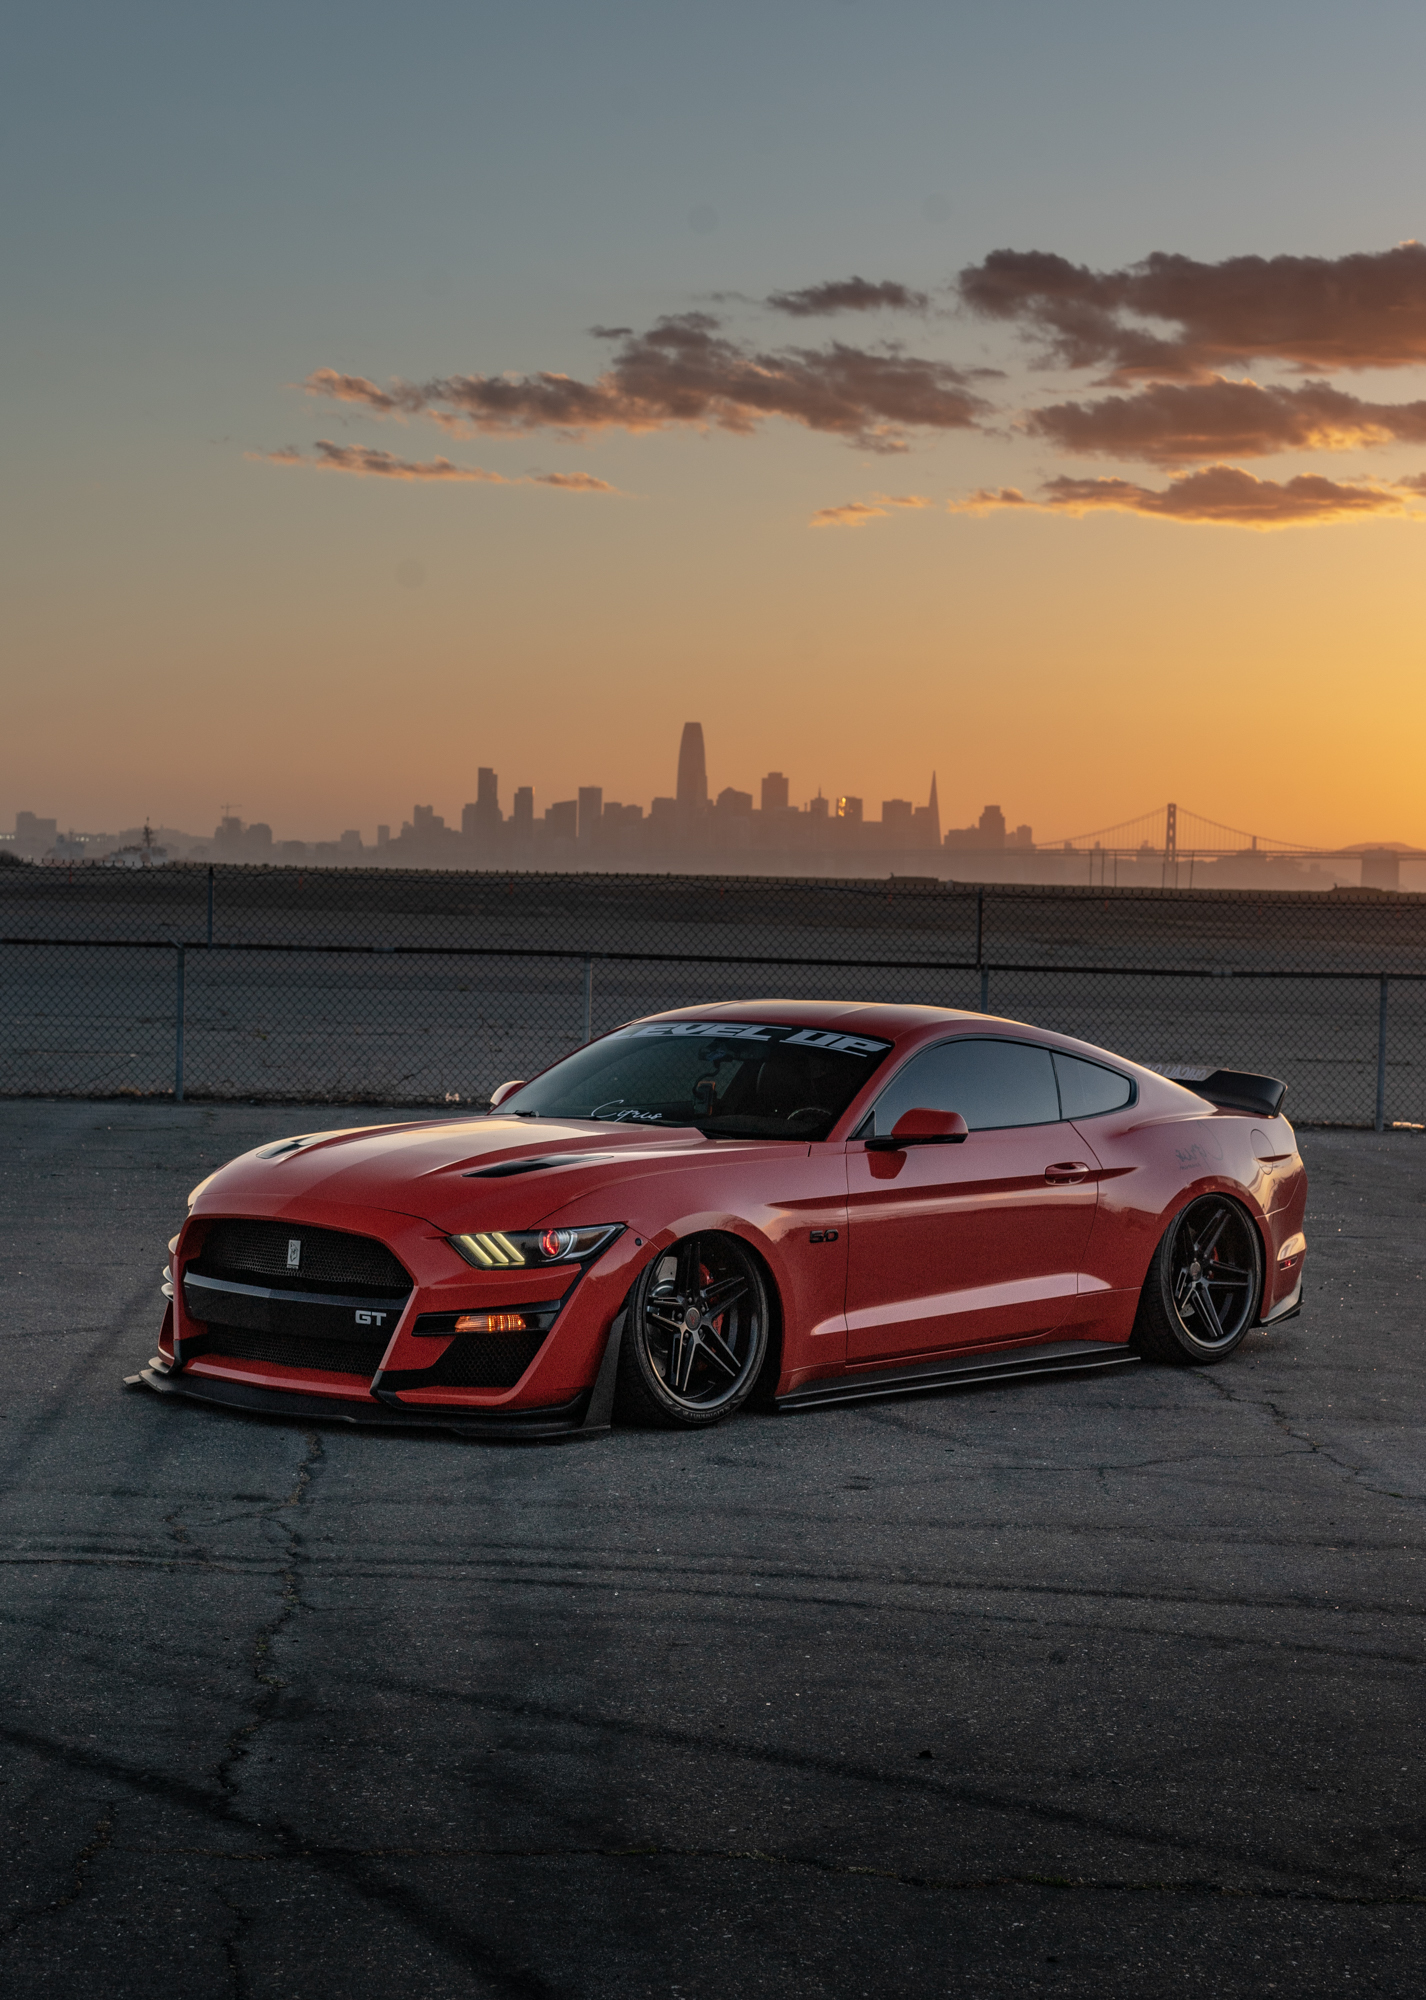 2016 Ford Mustang (Bagged) - CM1 MB (18 of 24)